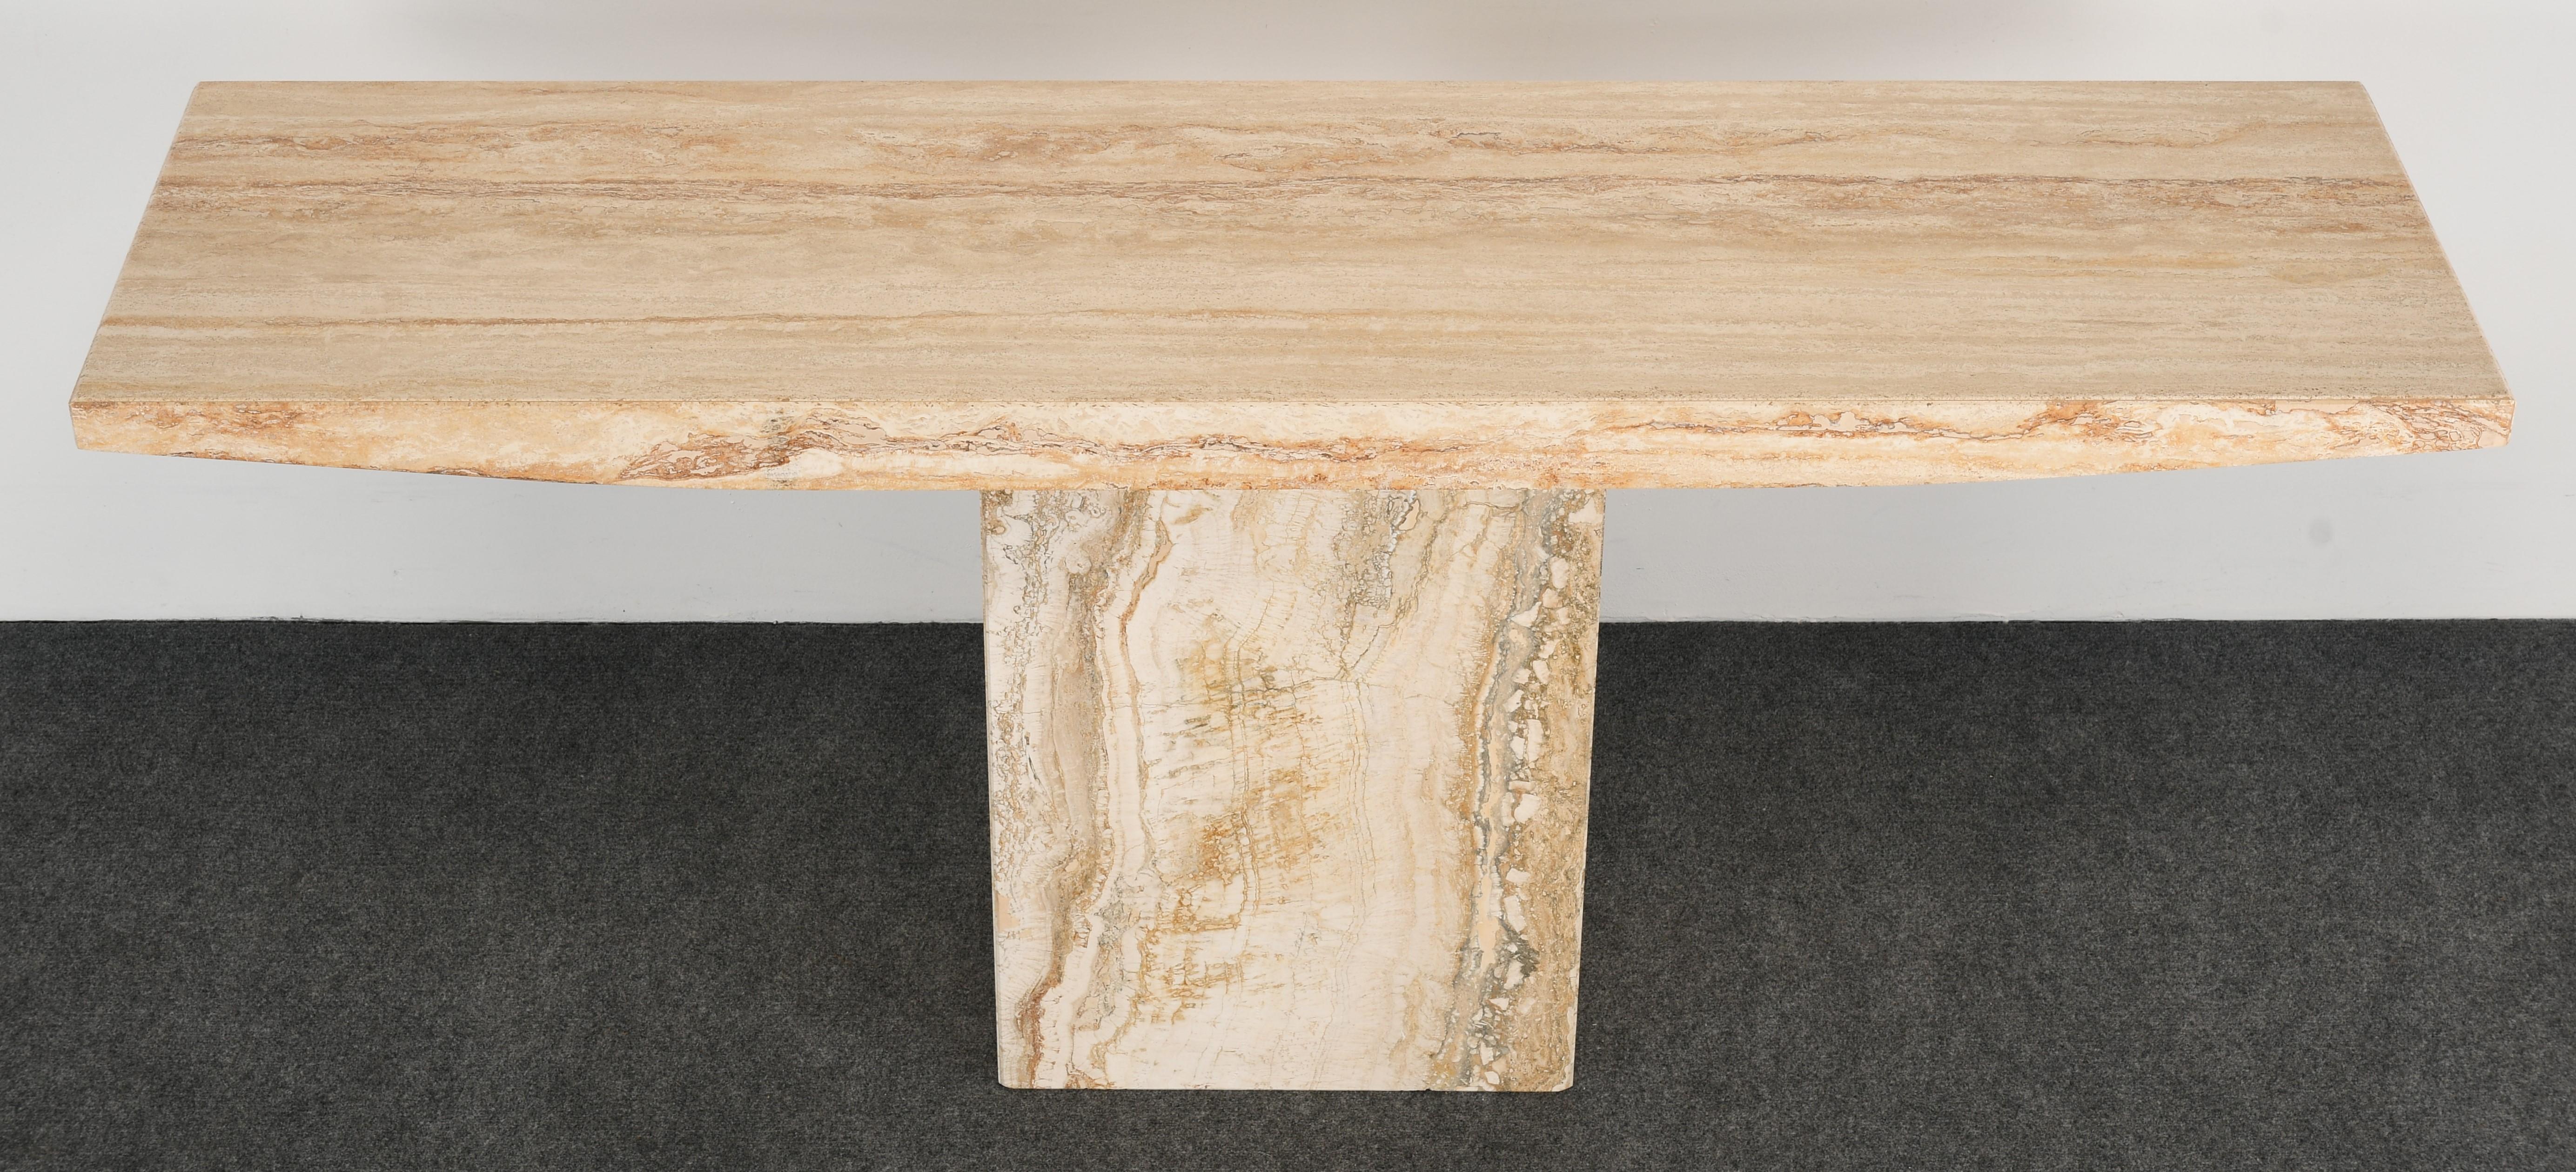 A Minimalist travertine console table in the manner of Stone International or Roche Bobois. This console table has wonderful modern lines as well naturalist color and veining. This table is structurally sound and in very good condition with